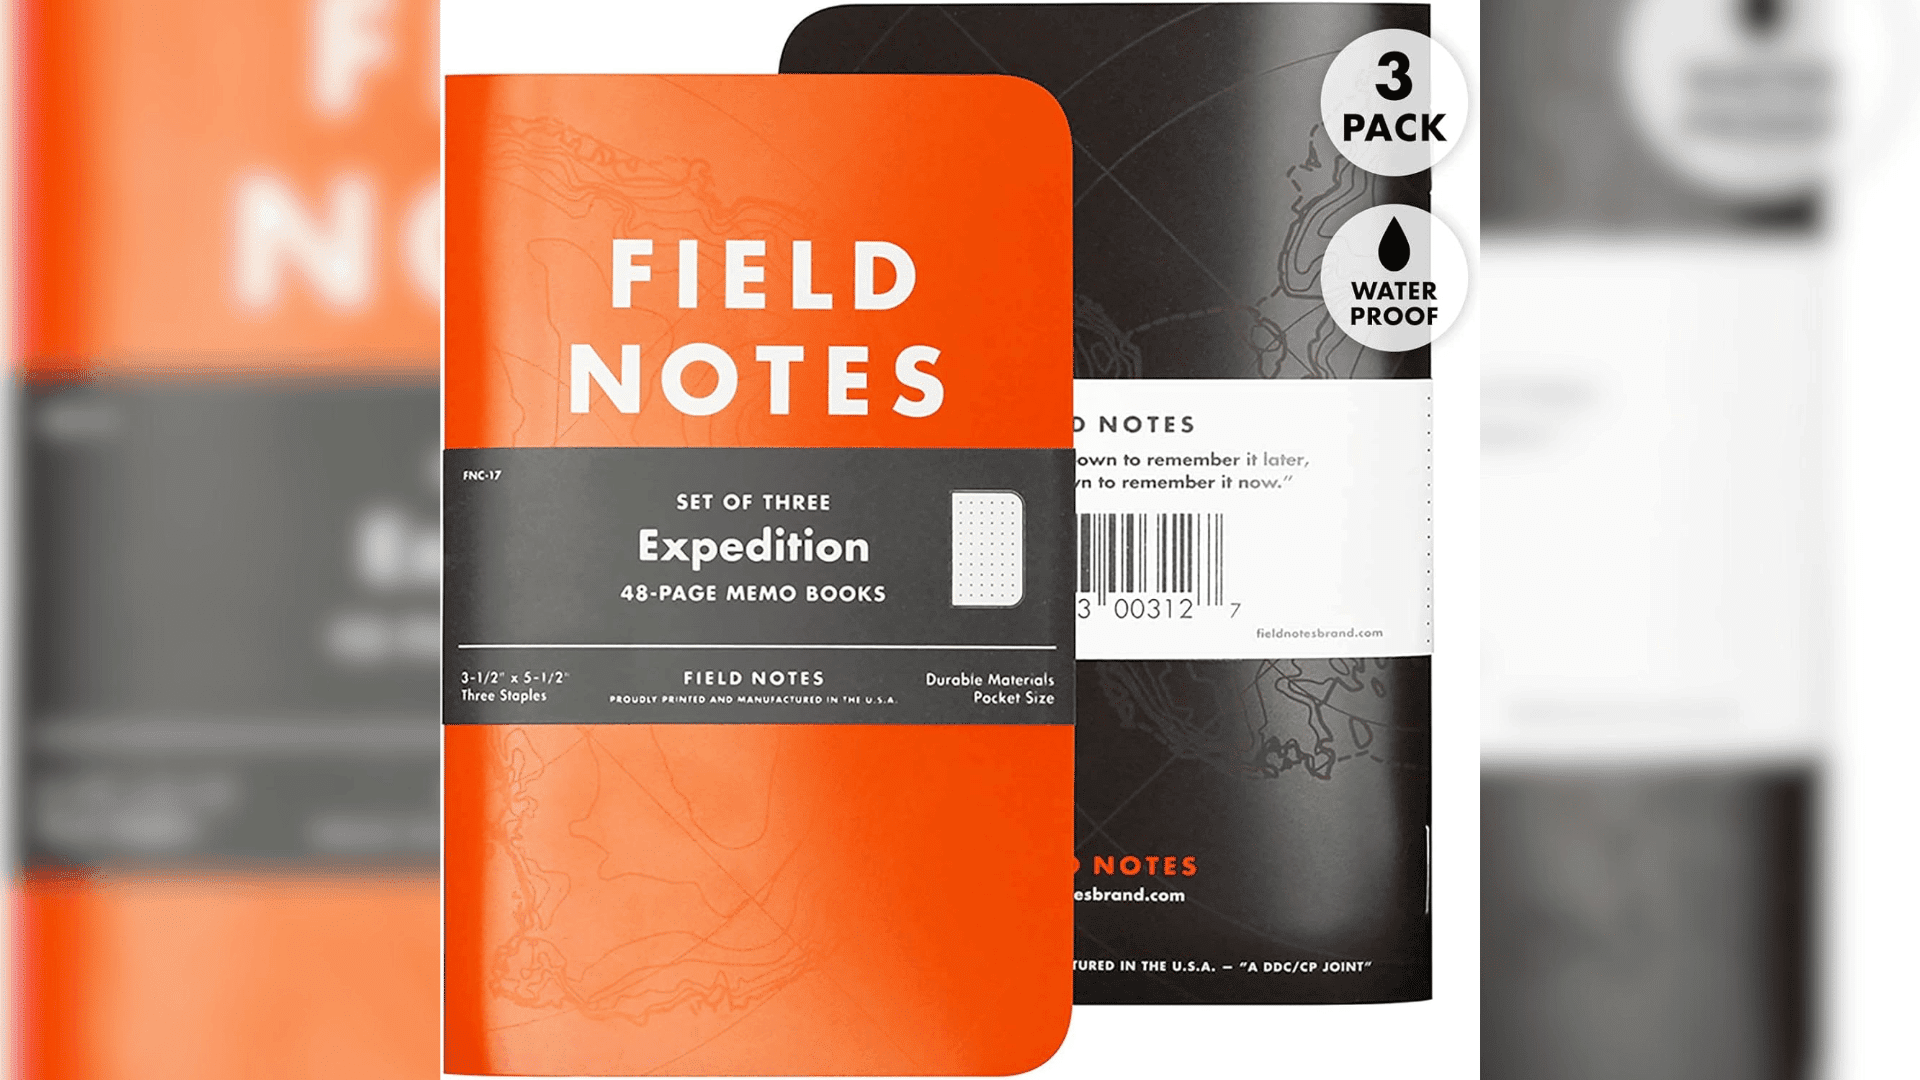 Field Notes Expedition Edition 3-Pack Waterproof Notebook